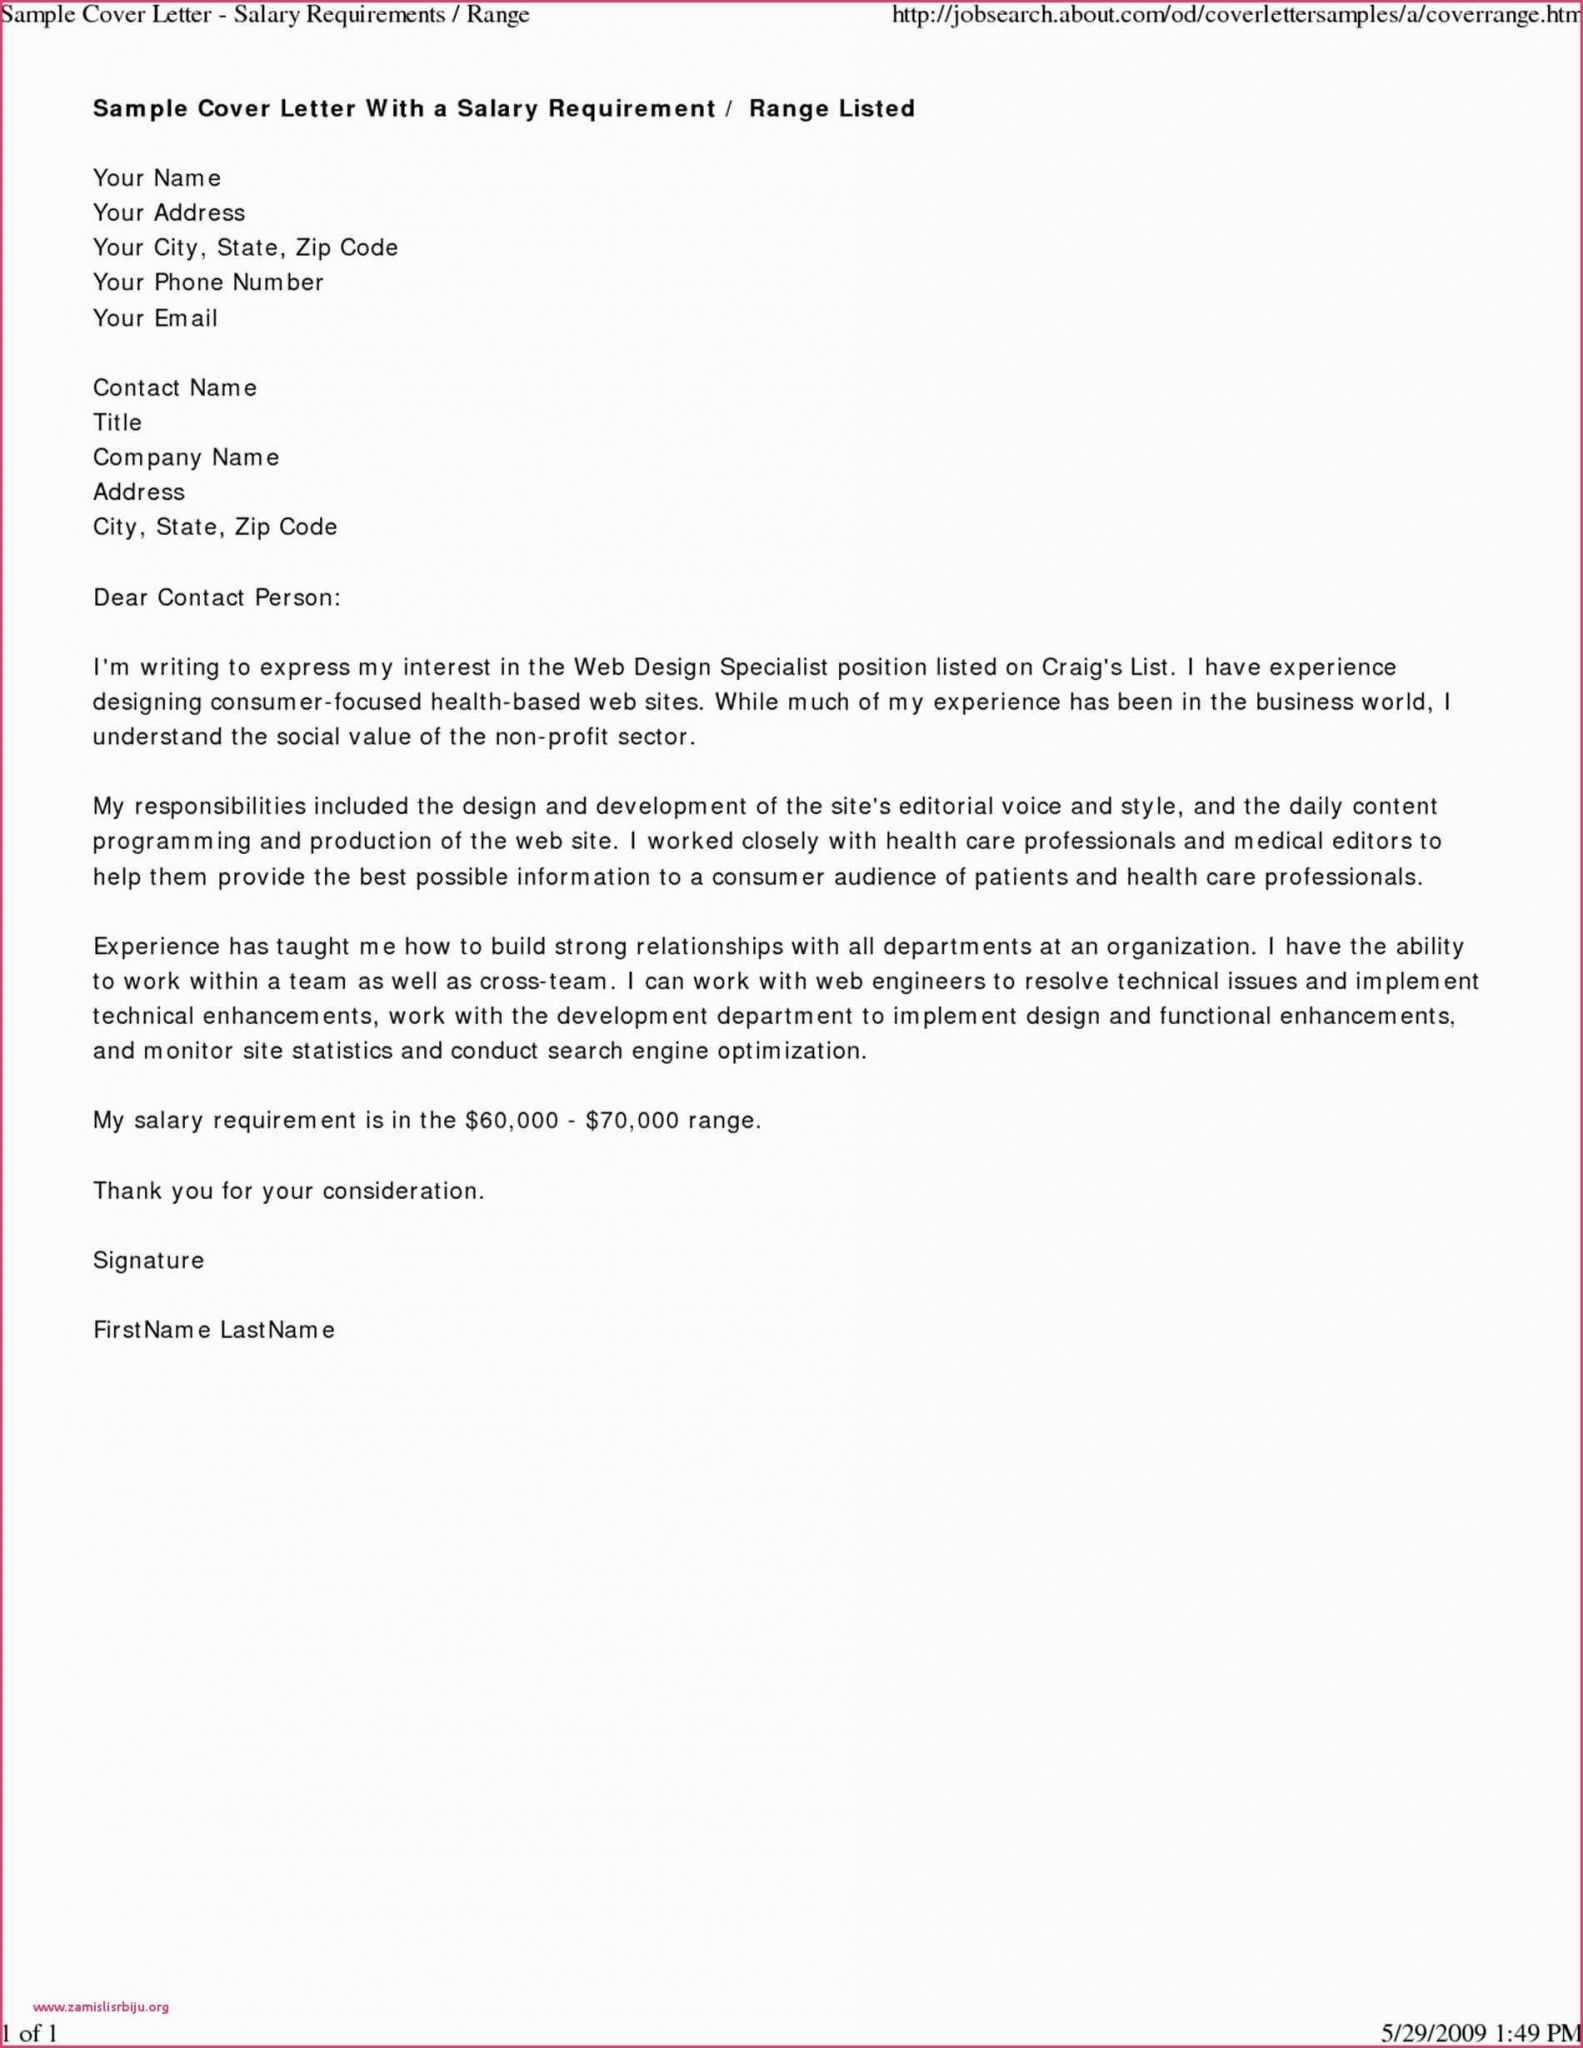 Sample Letter Requesting Sales Tax Exemption Certificate Regarding Resale Certificate Request Letter Template